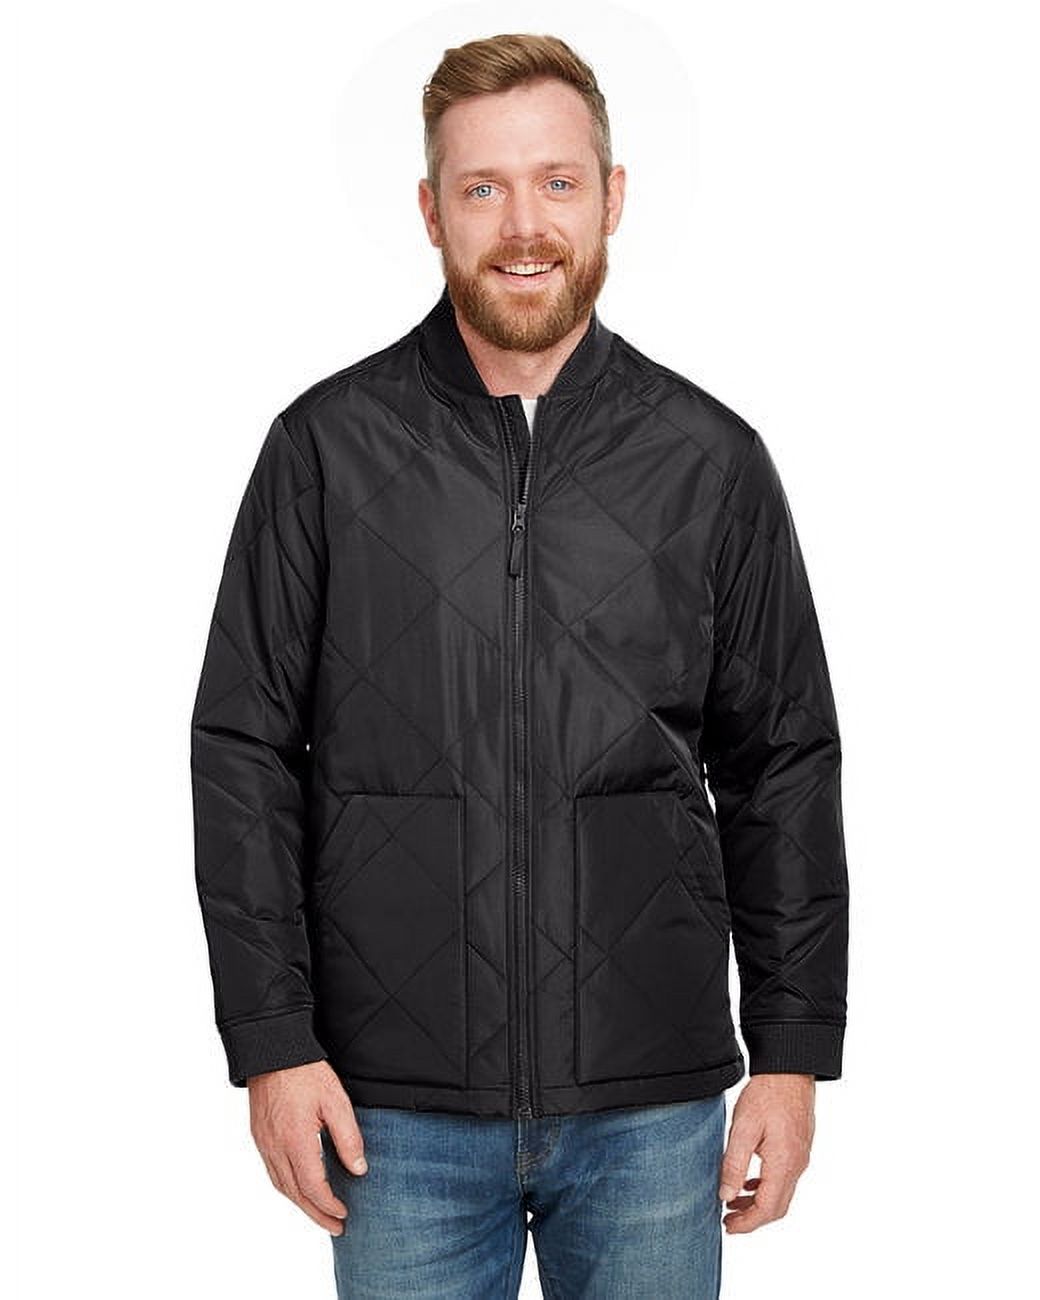 Adult Dockside Insulated Utility Jacket - DARK CHARCOAL - S - image 1 of 3